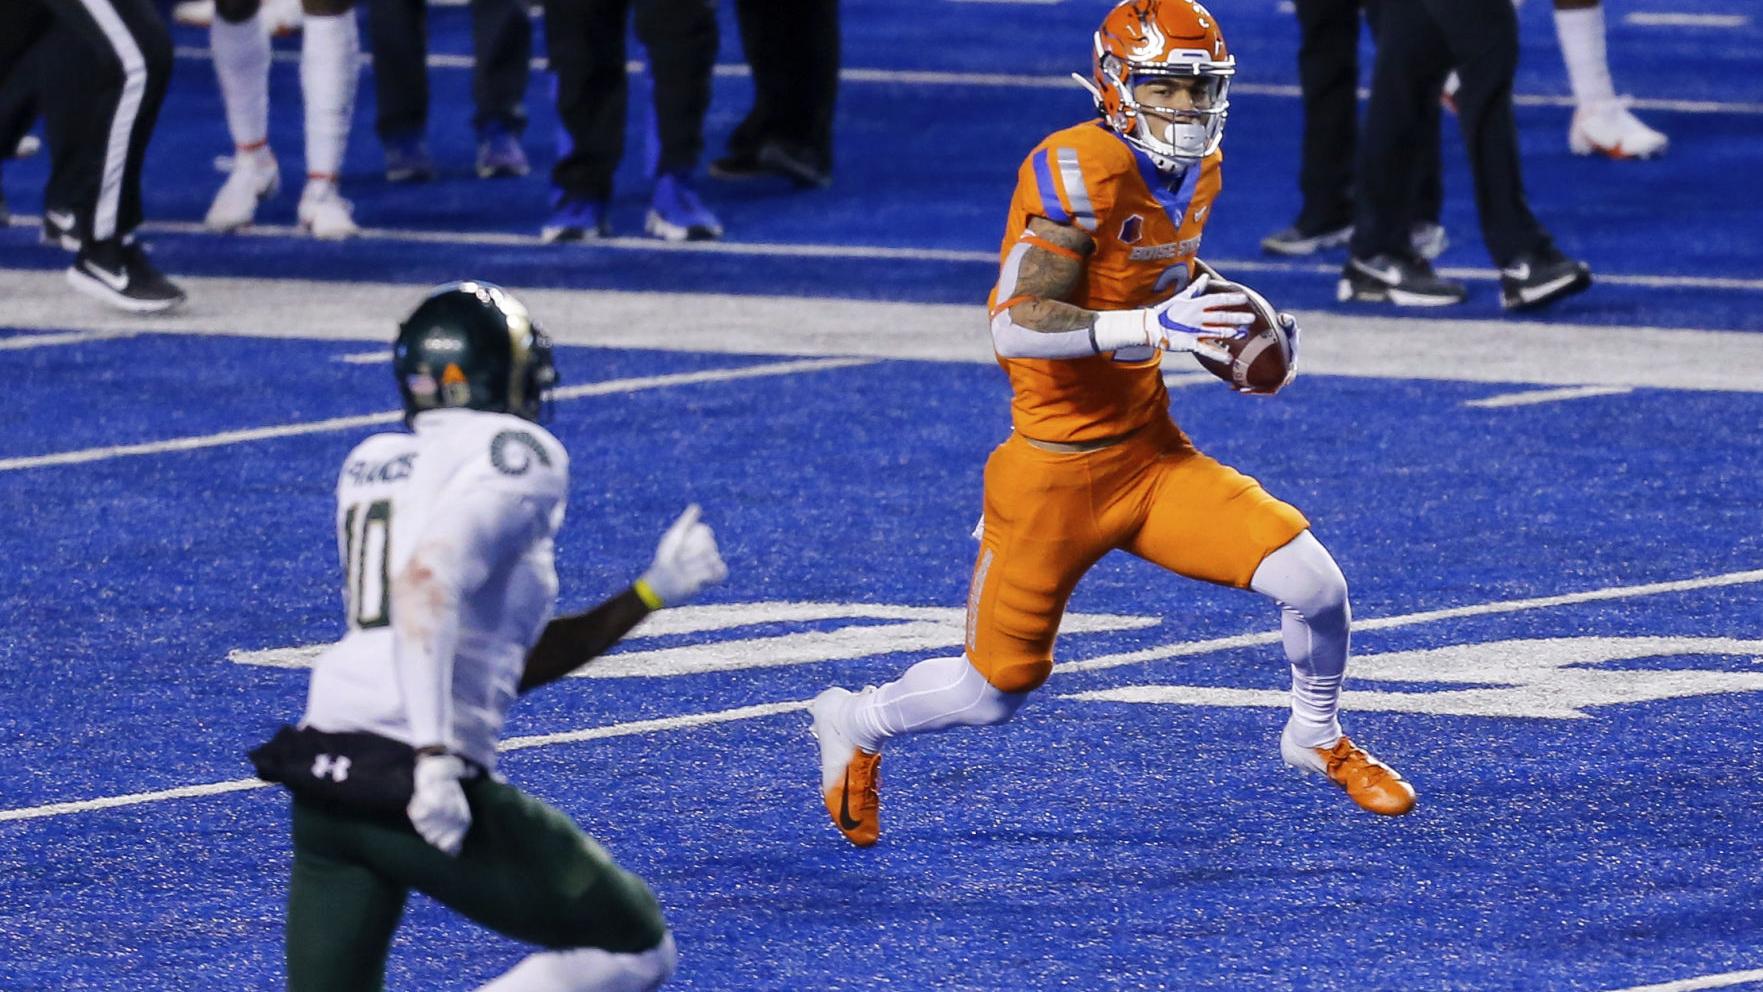 UTEP Miners vs. Boise State Broncos 9-10-2021- Free Pick & CFB Betting Prediction